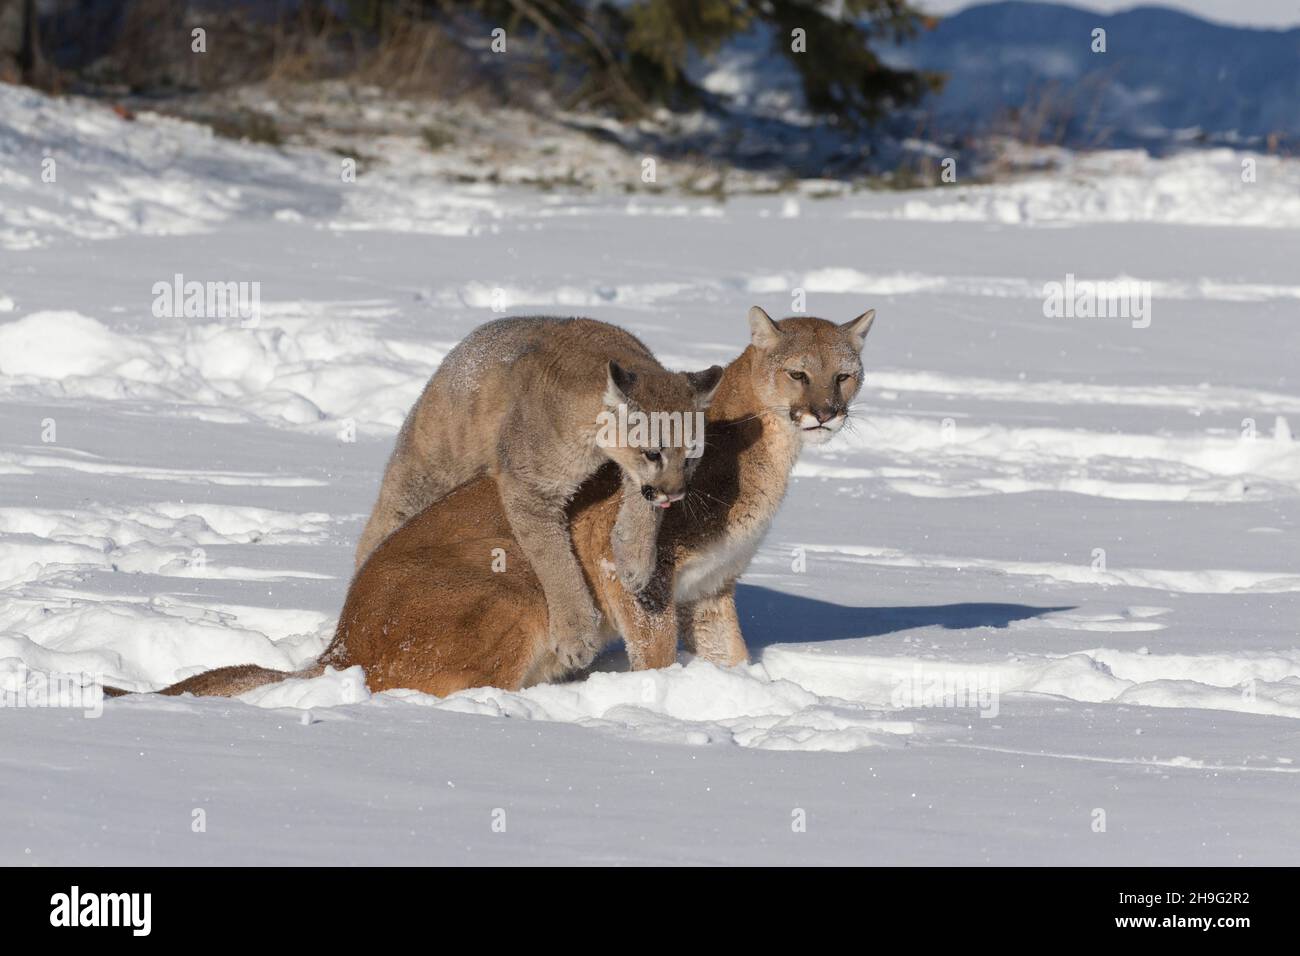 Puma (Felis concolor) adult female with cub in snow, Montana, USA, March, controlled conditions Stock Photo